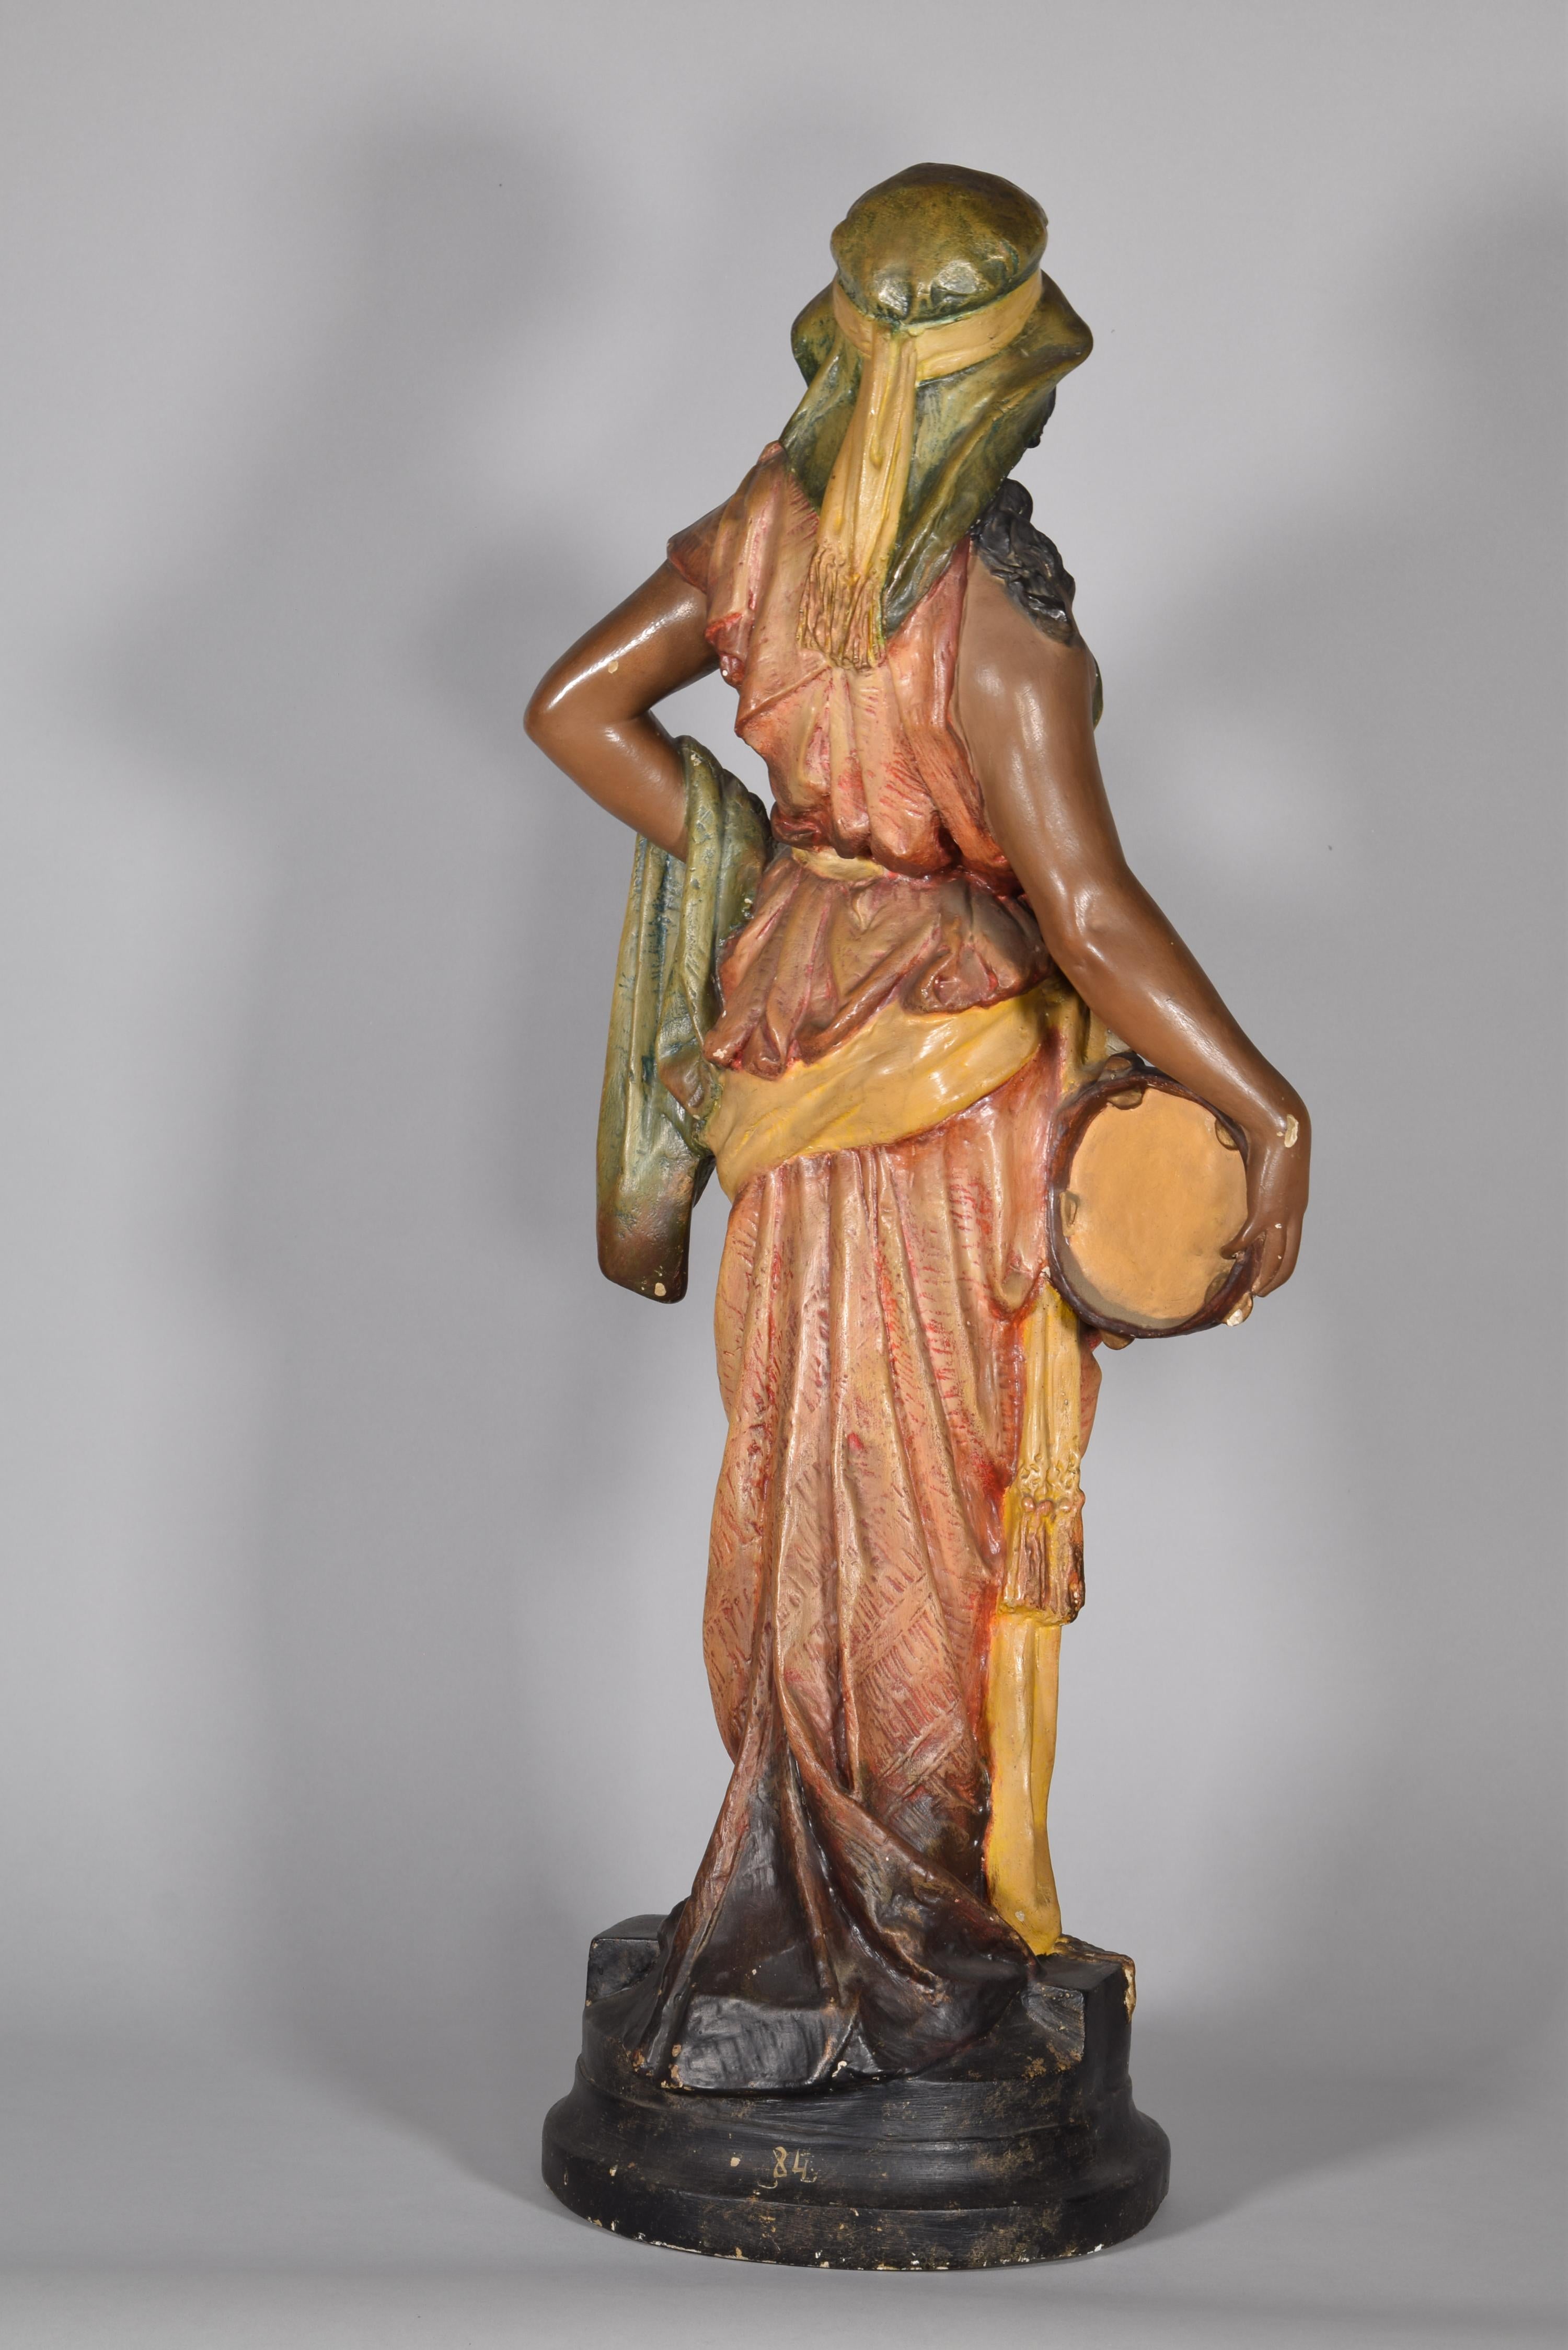 Neoclassical Orientalist Sculpture, Polychromed Plaster or Scagliola, 19th Century